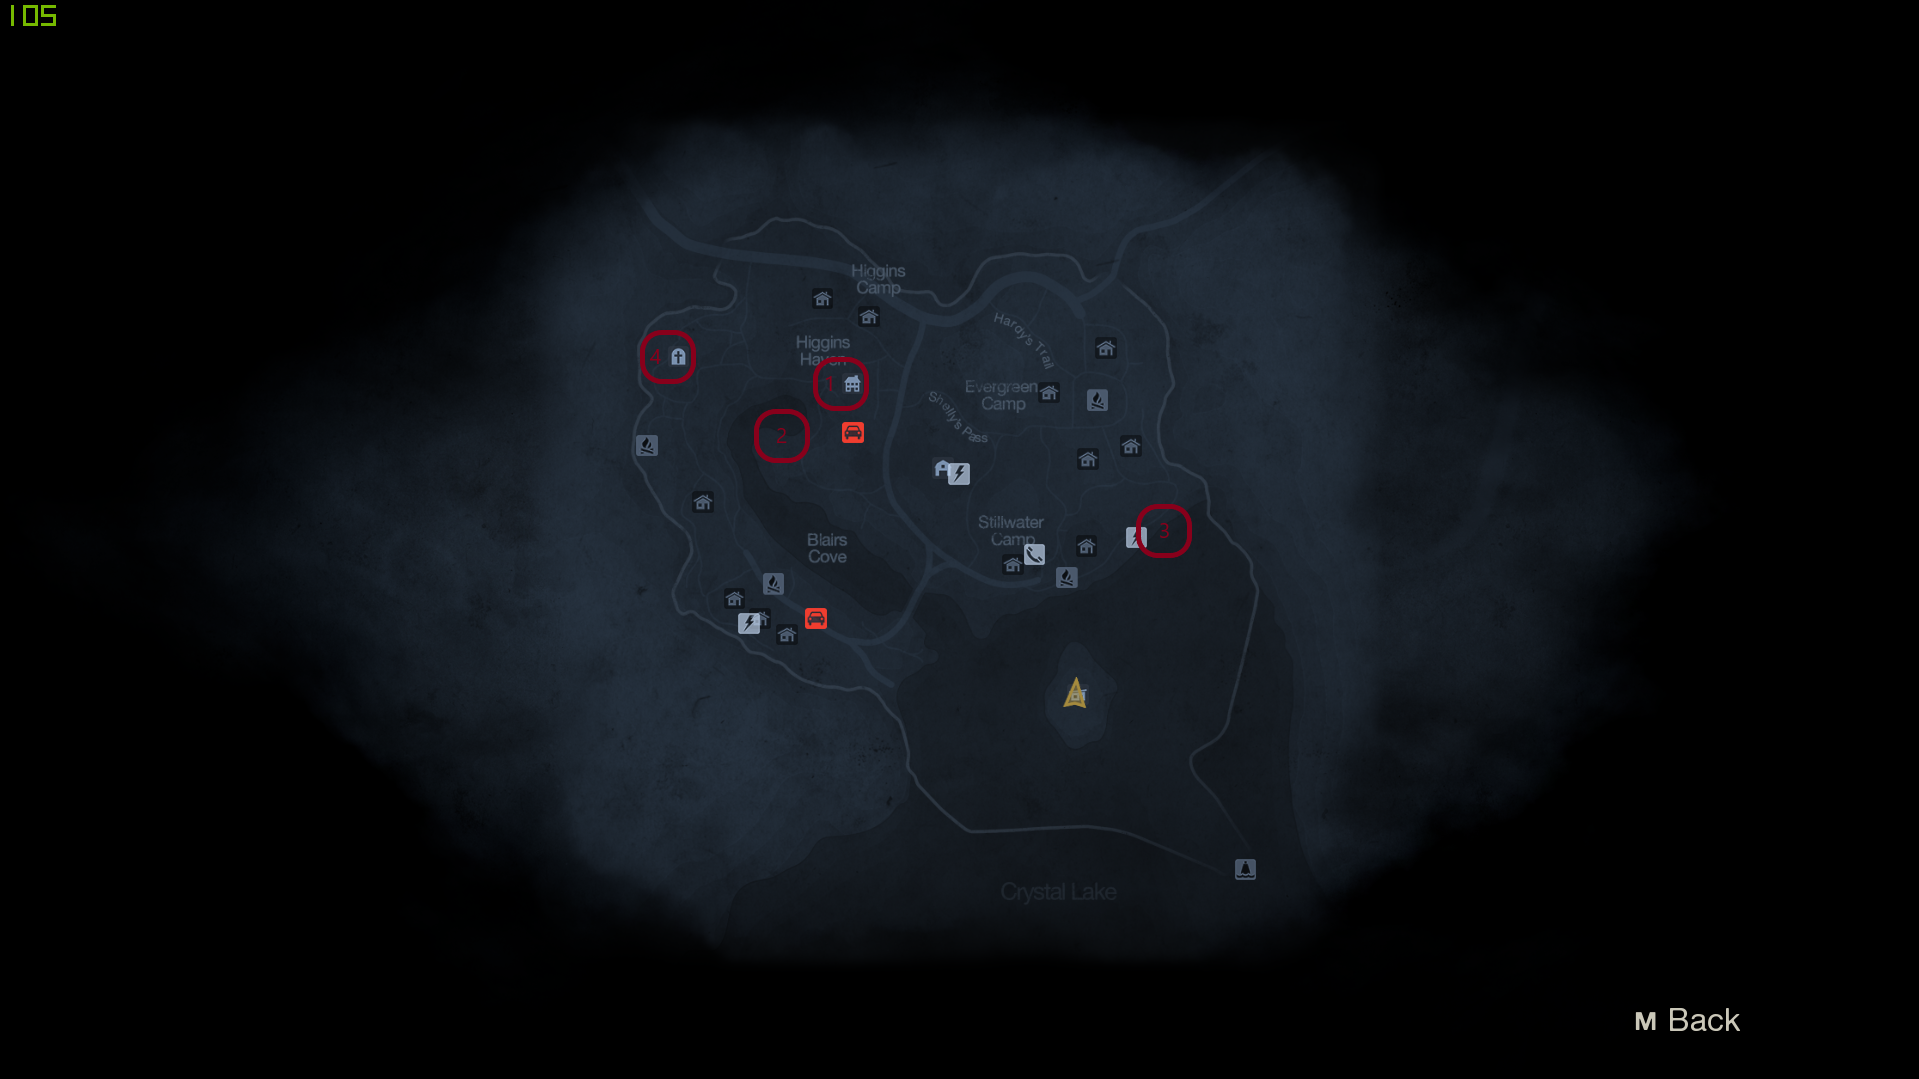 Friday the 13th: The Game - Med Spray Spawn Locations